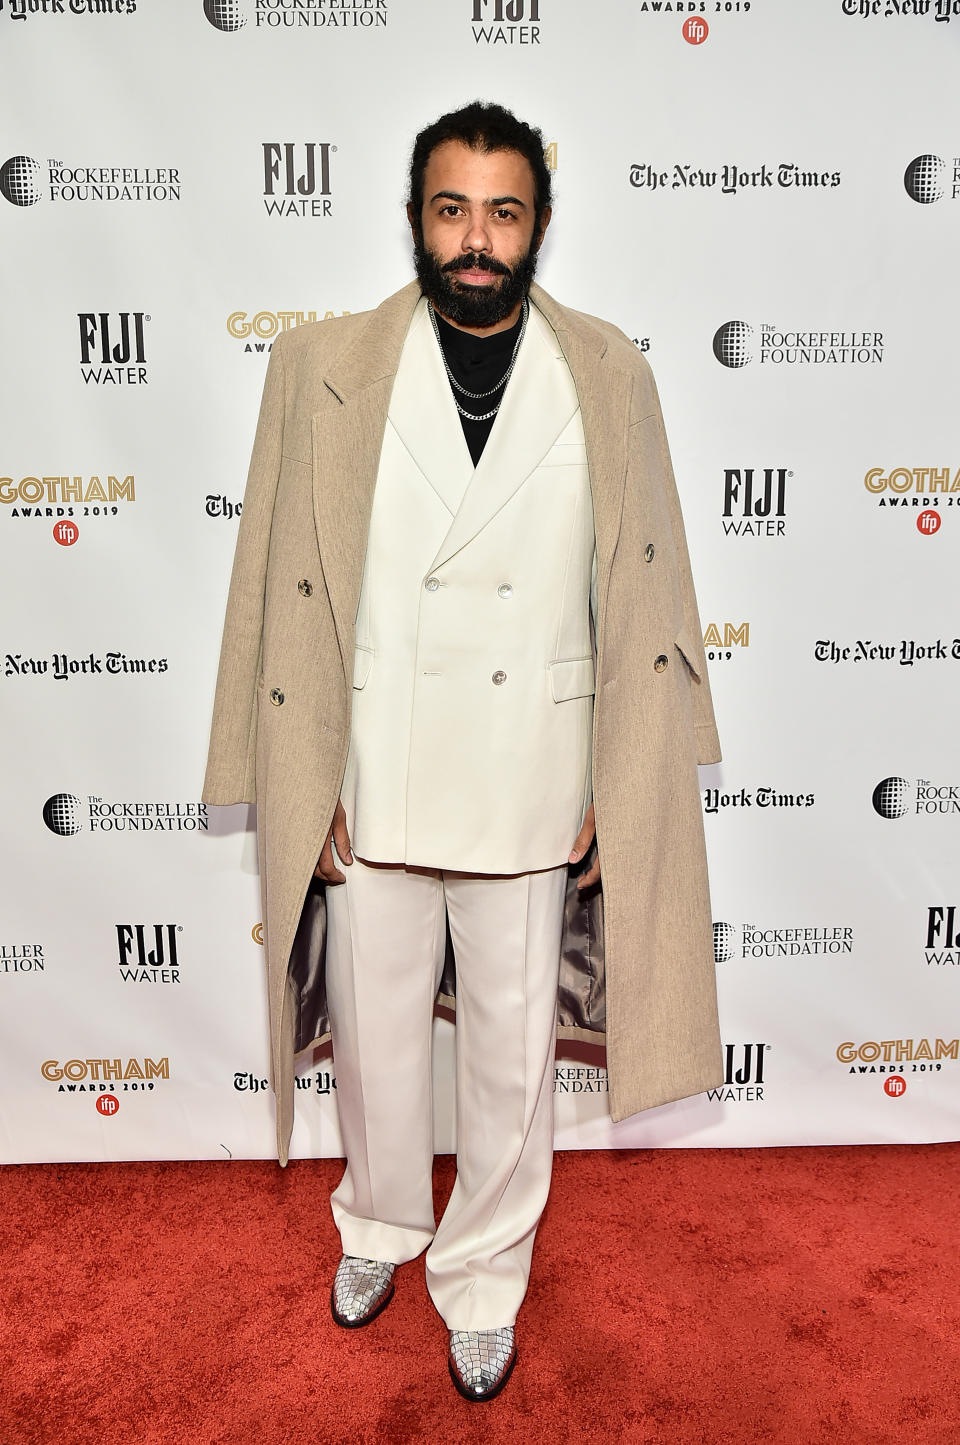 Daveed Diggs at the Gotham Independent Film Awards in New York City on Dec. 2.